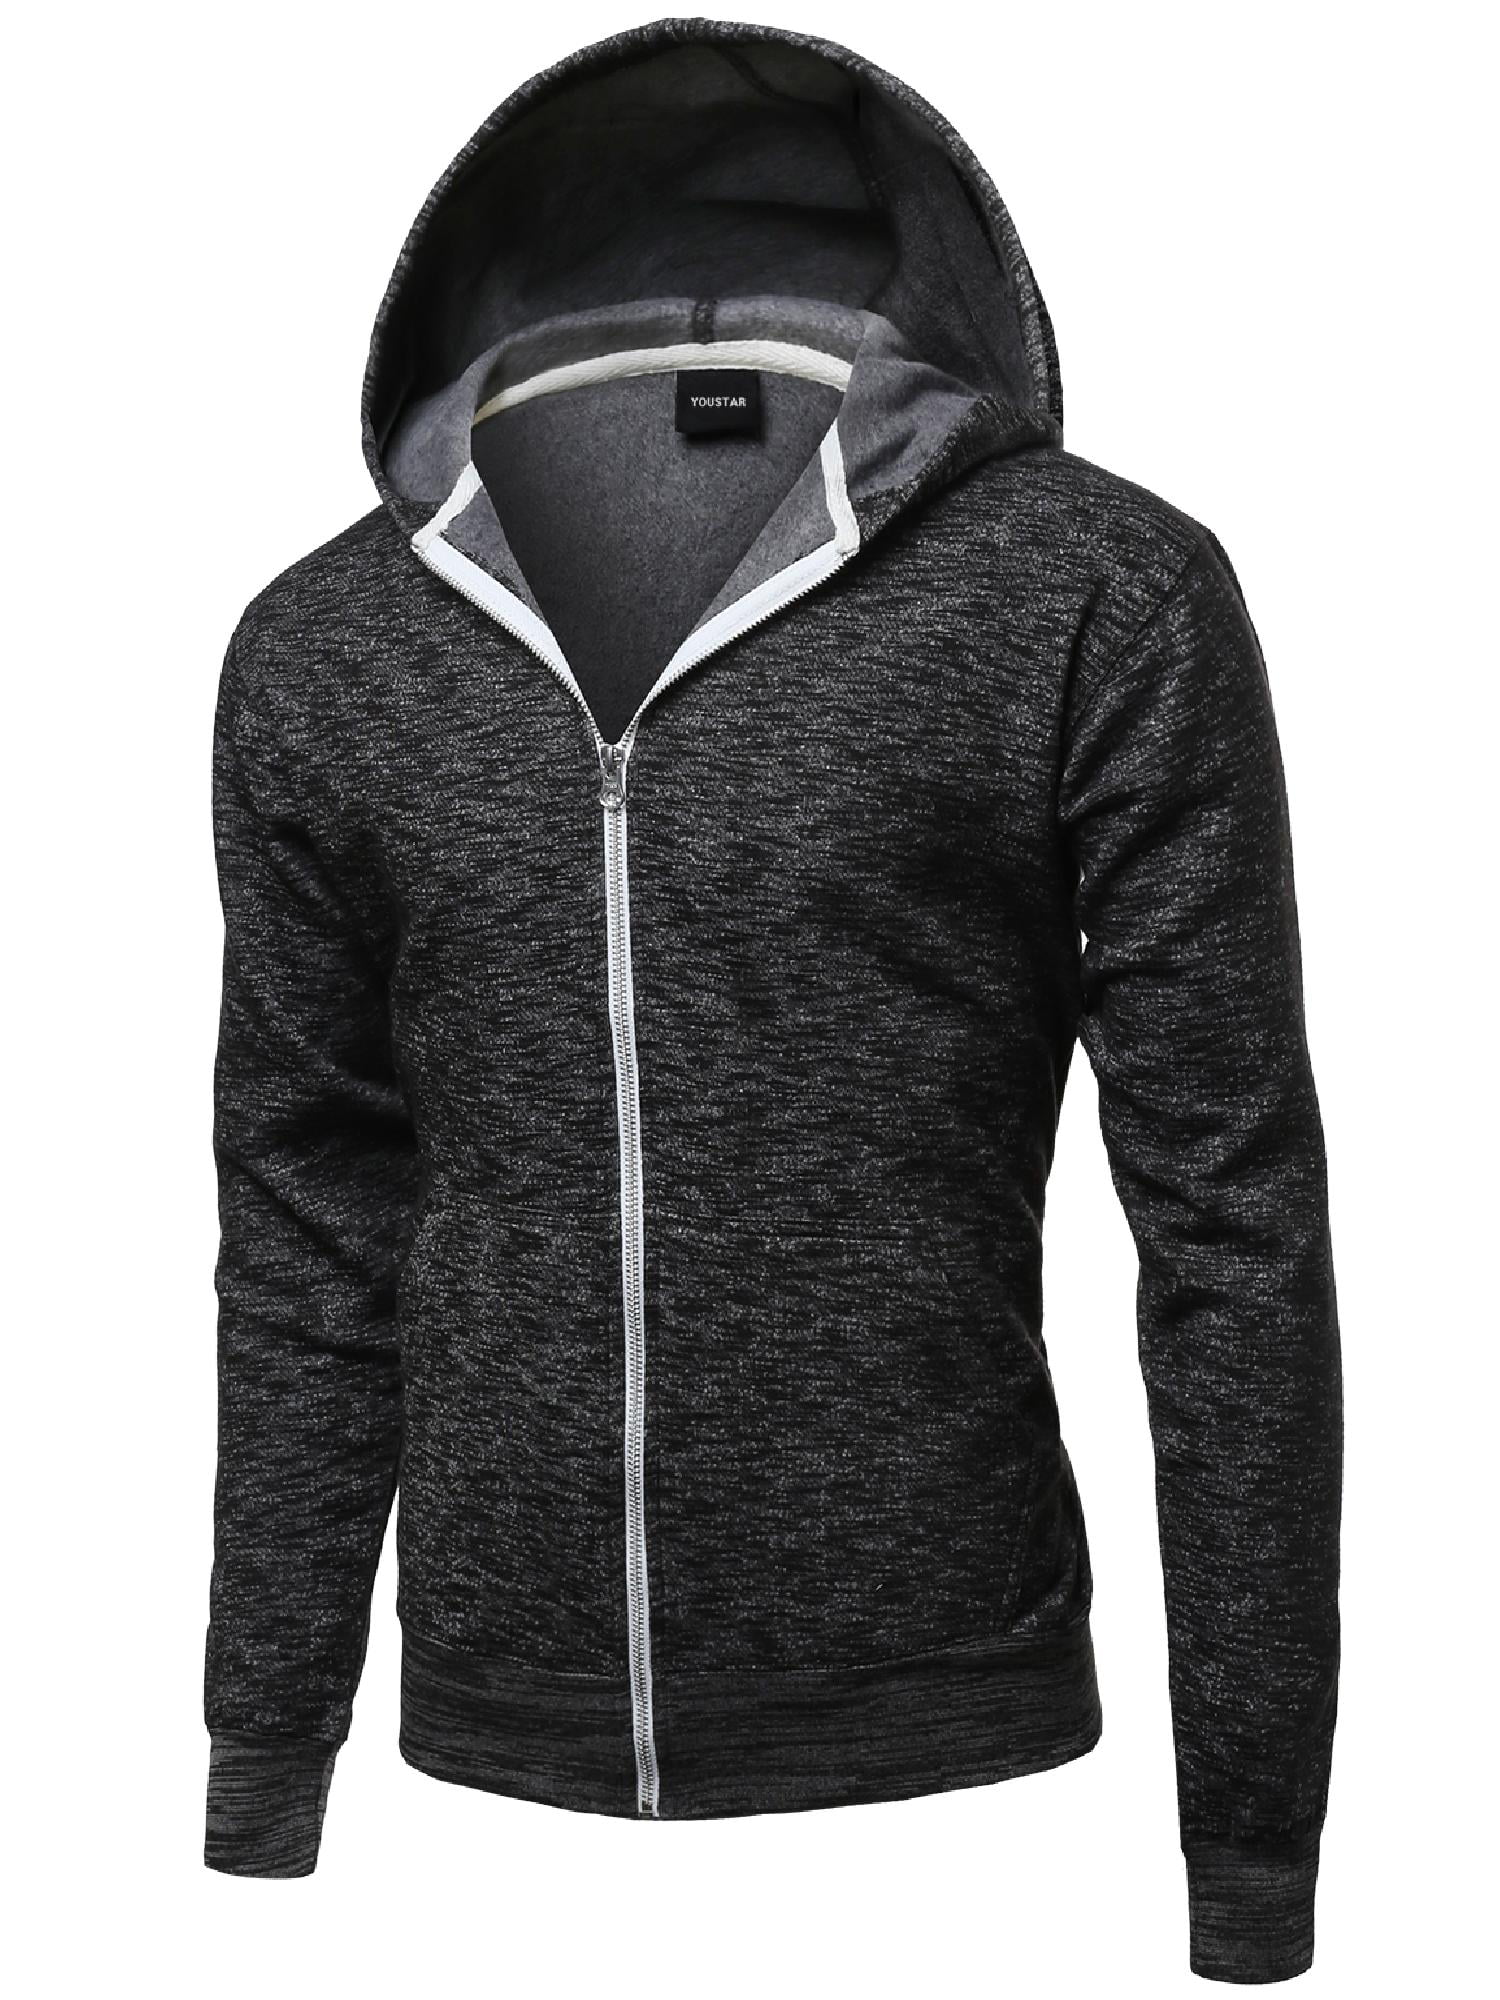 FashionOutfit Men's Basic Solid Light Weight Hoodie Jackets